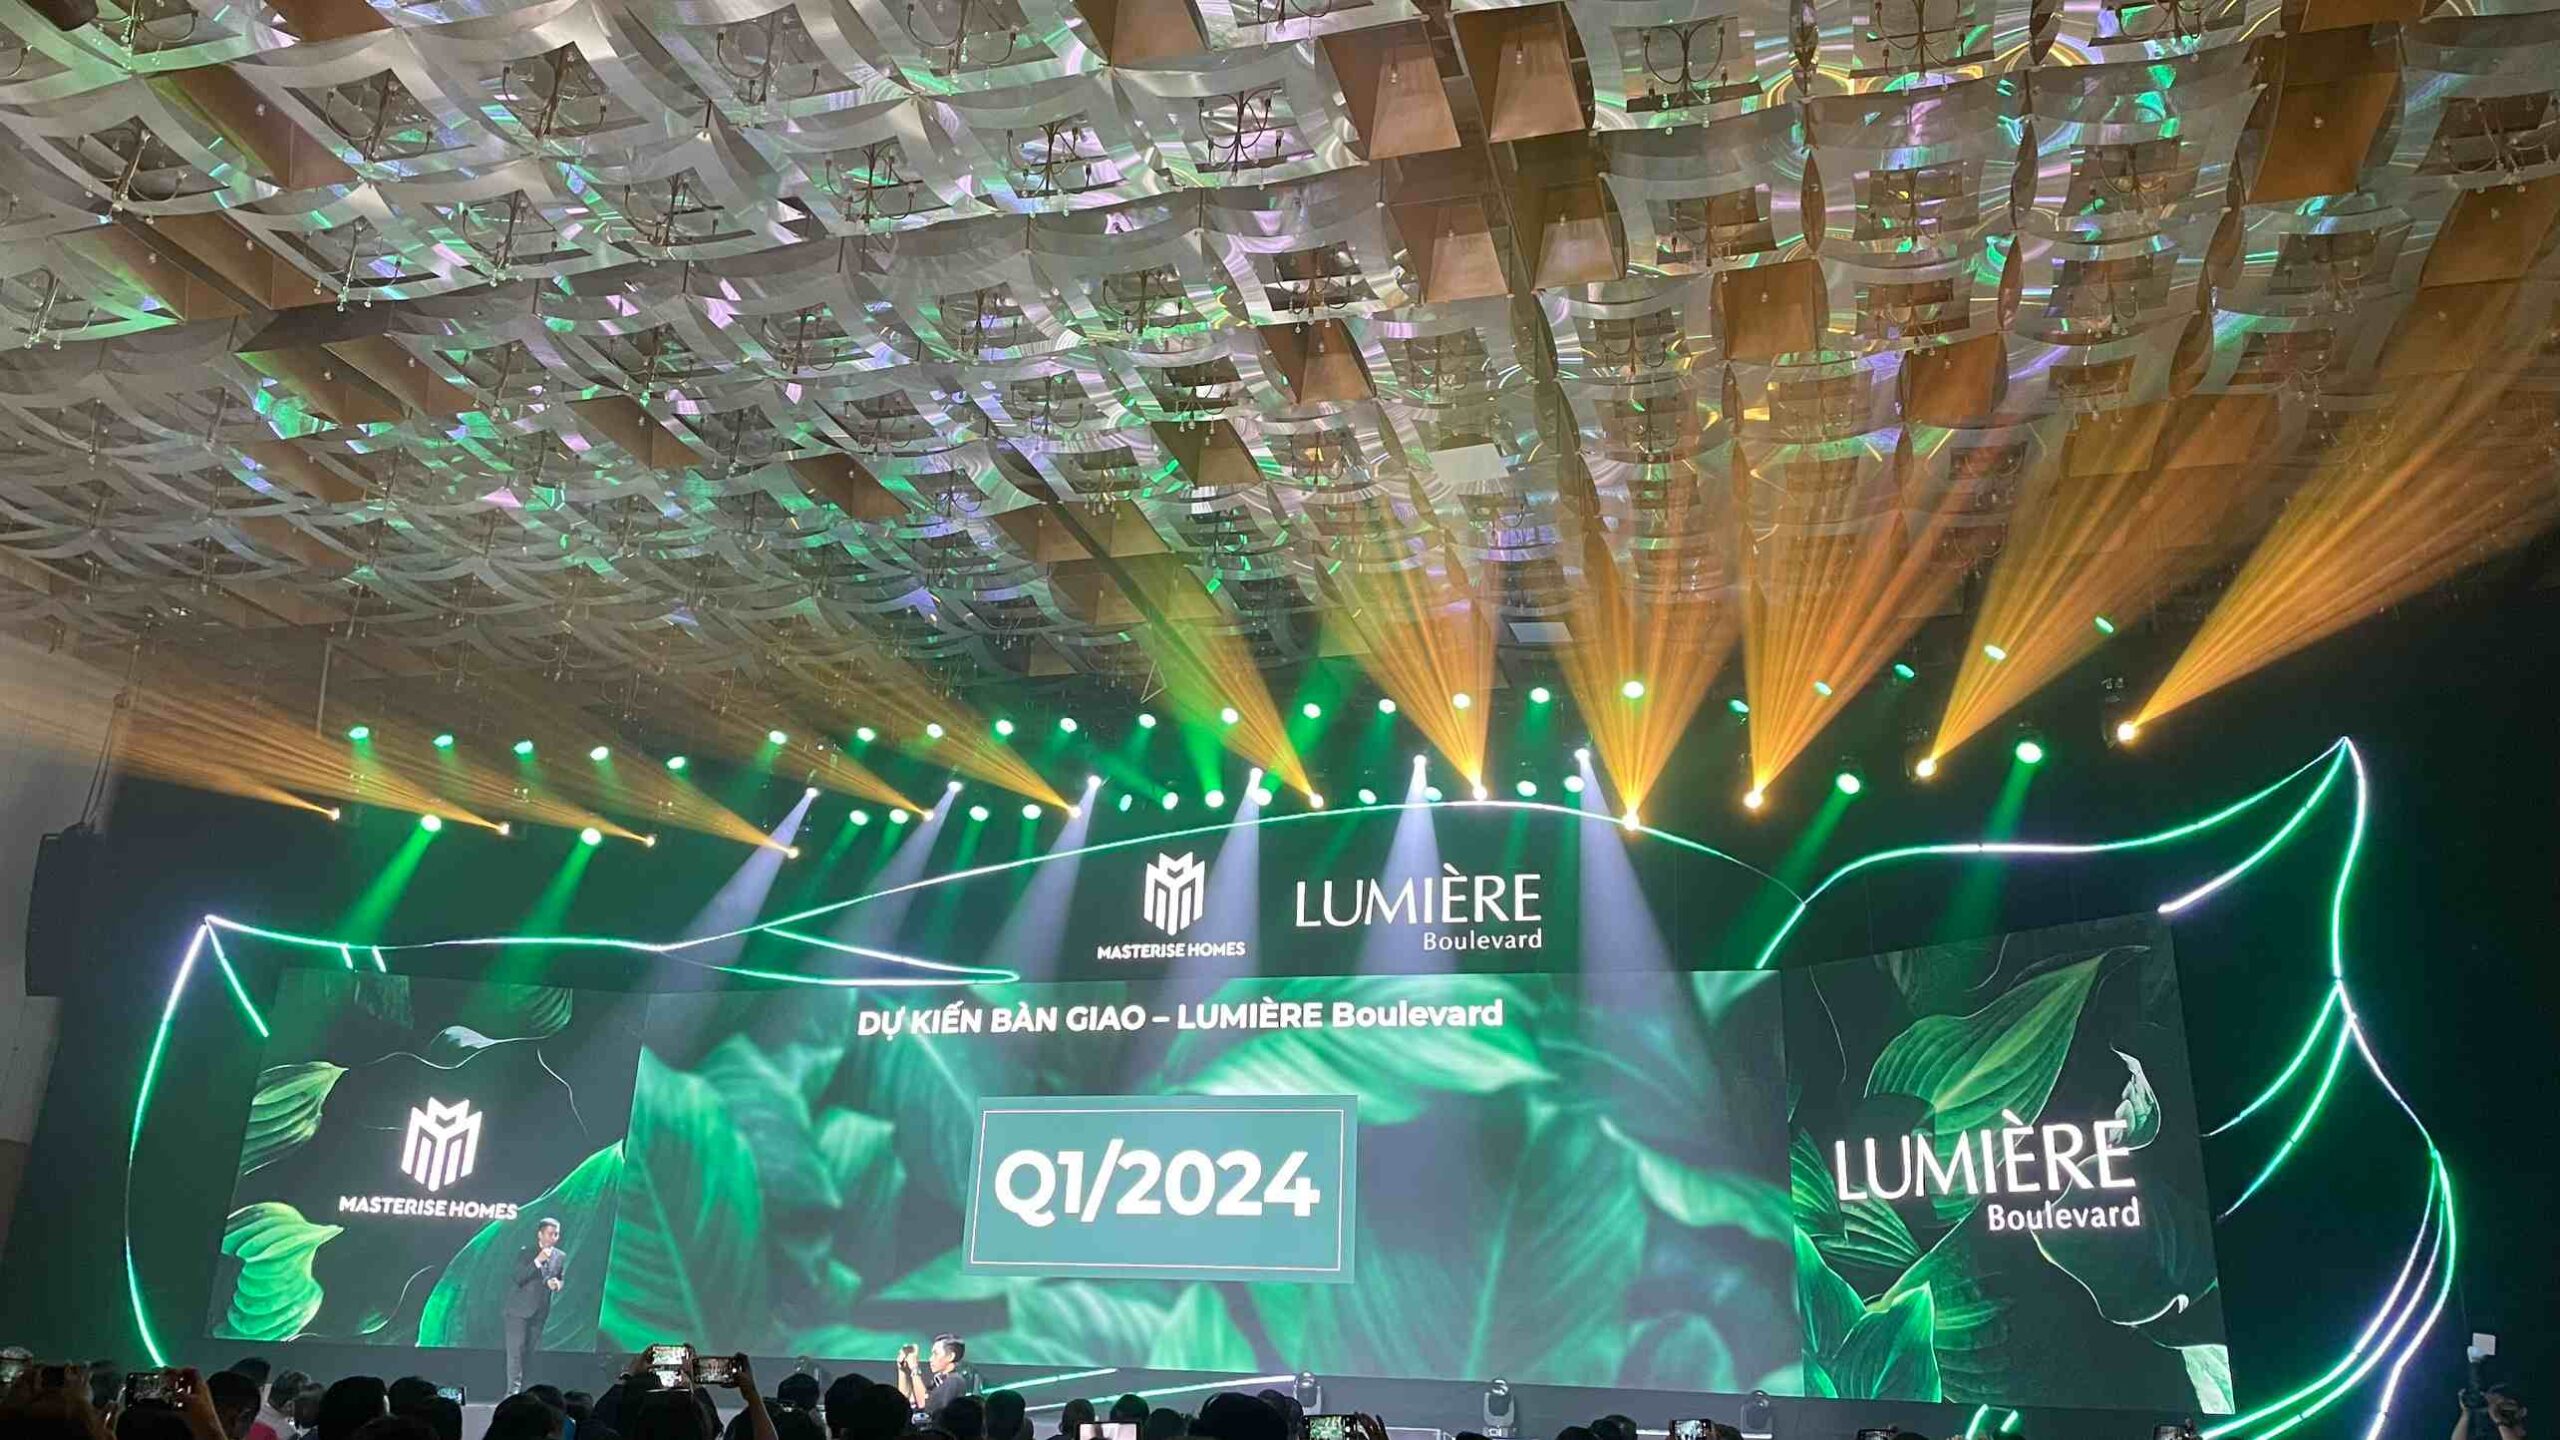 Launching ceremony of LUMIÈRE Boulevard project on May 27, 2022